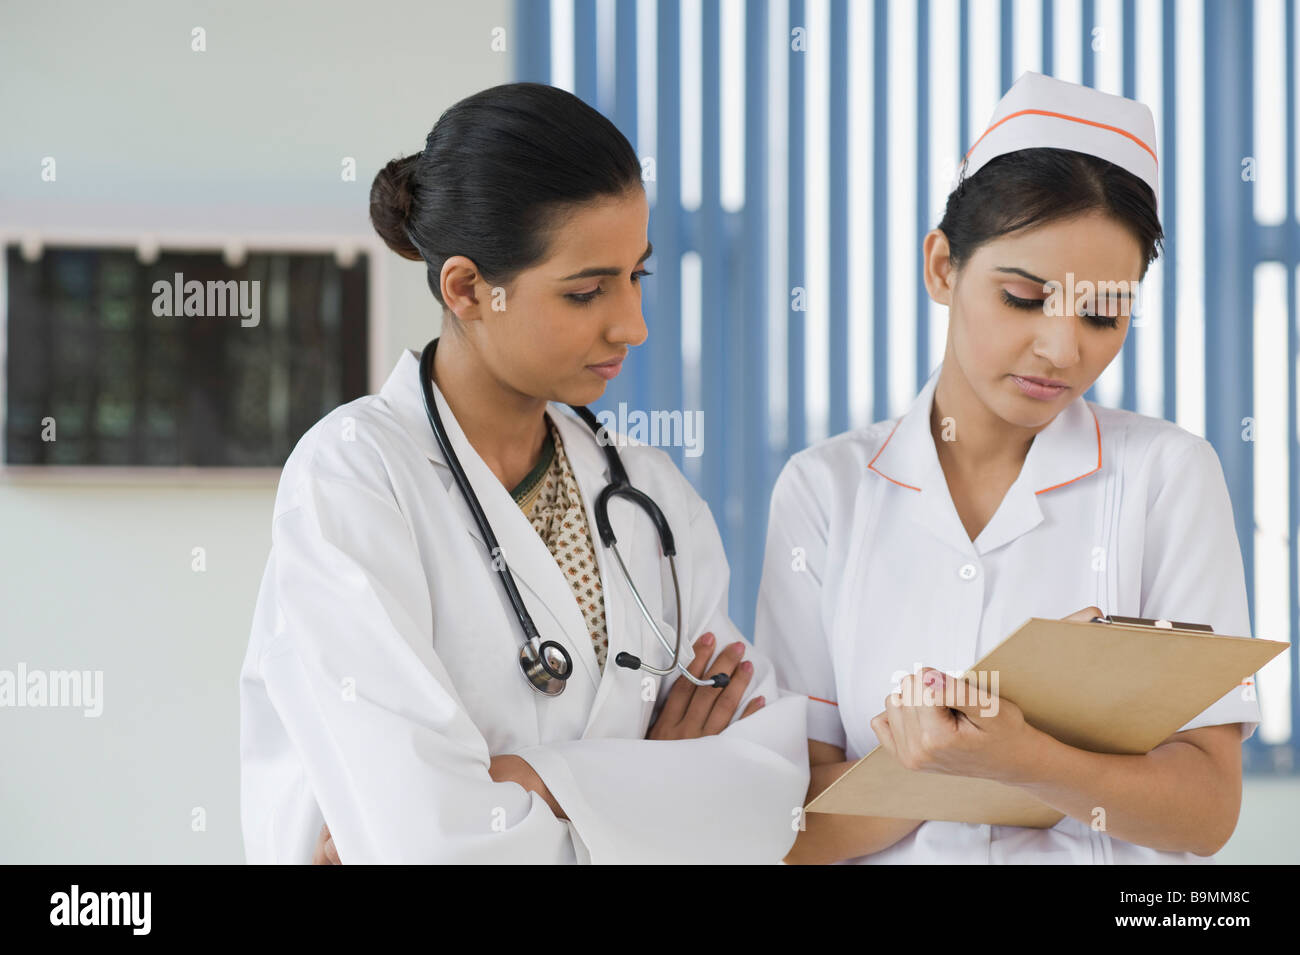 Female doctor and a nurse discussing a report Stock Photo